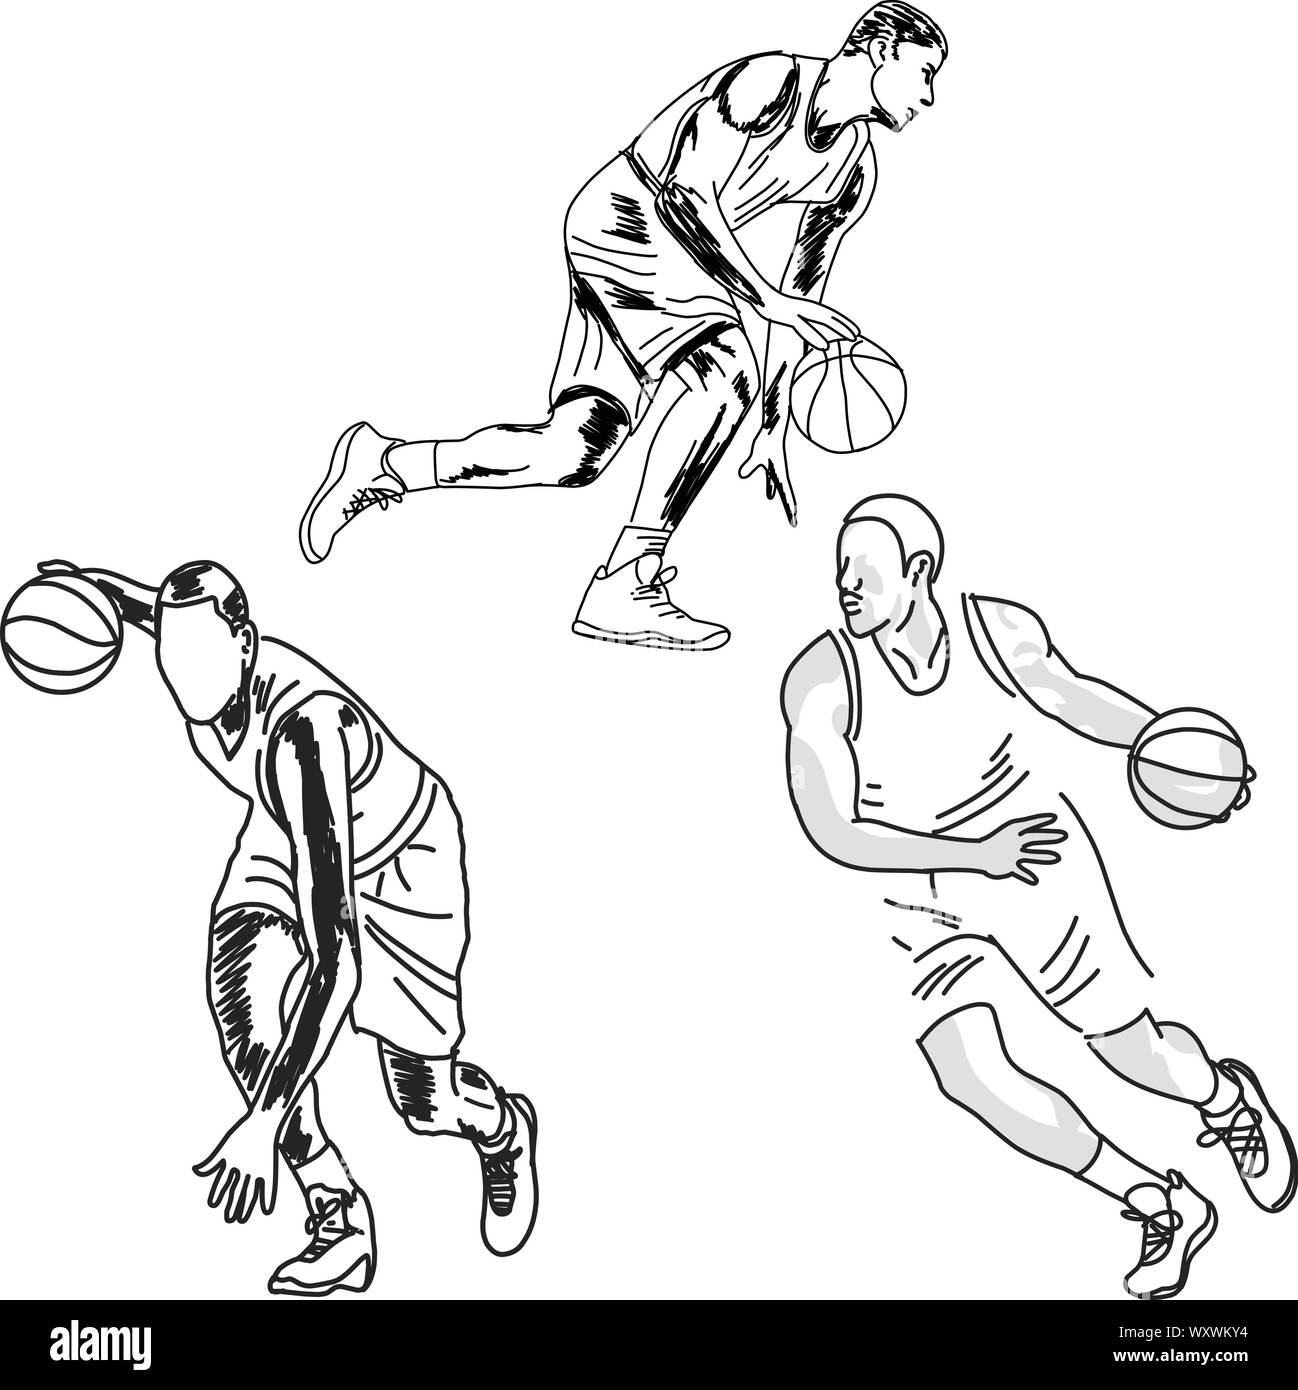 How to Draw a Basketball Player  Easy Drawing Art